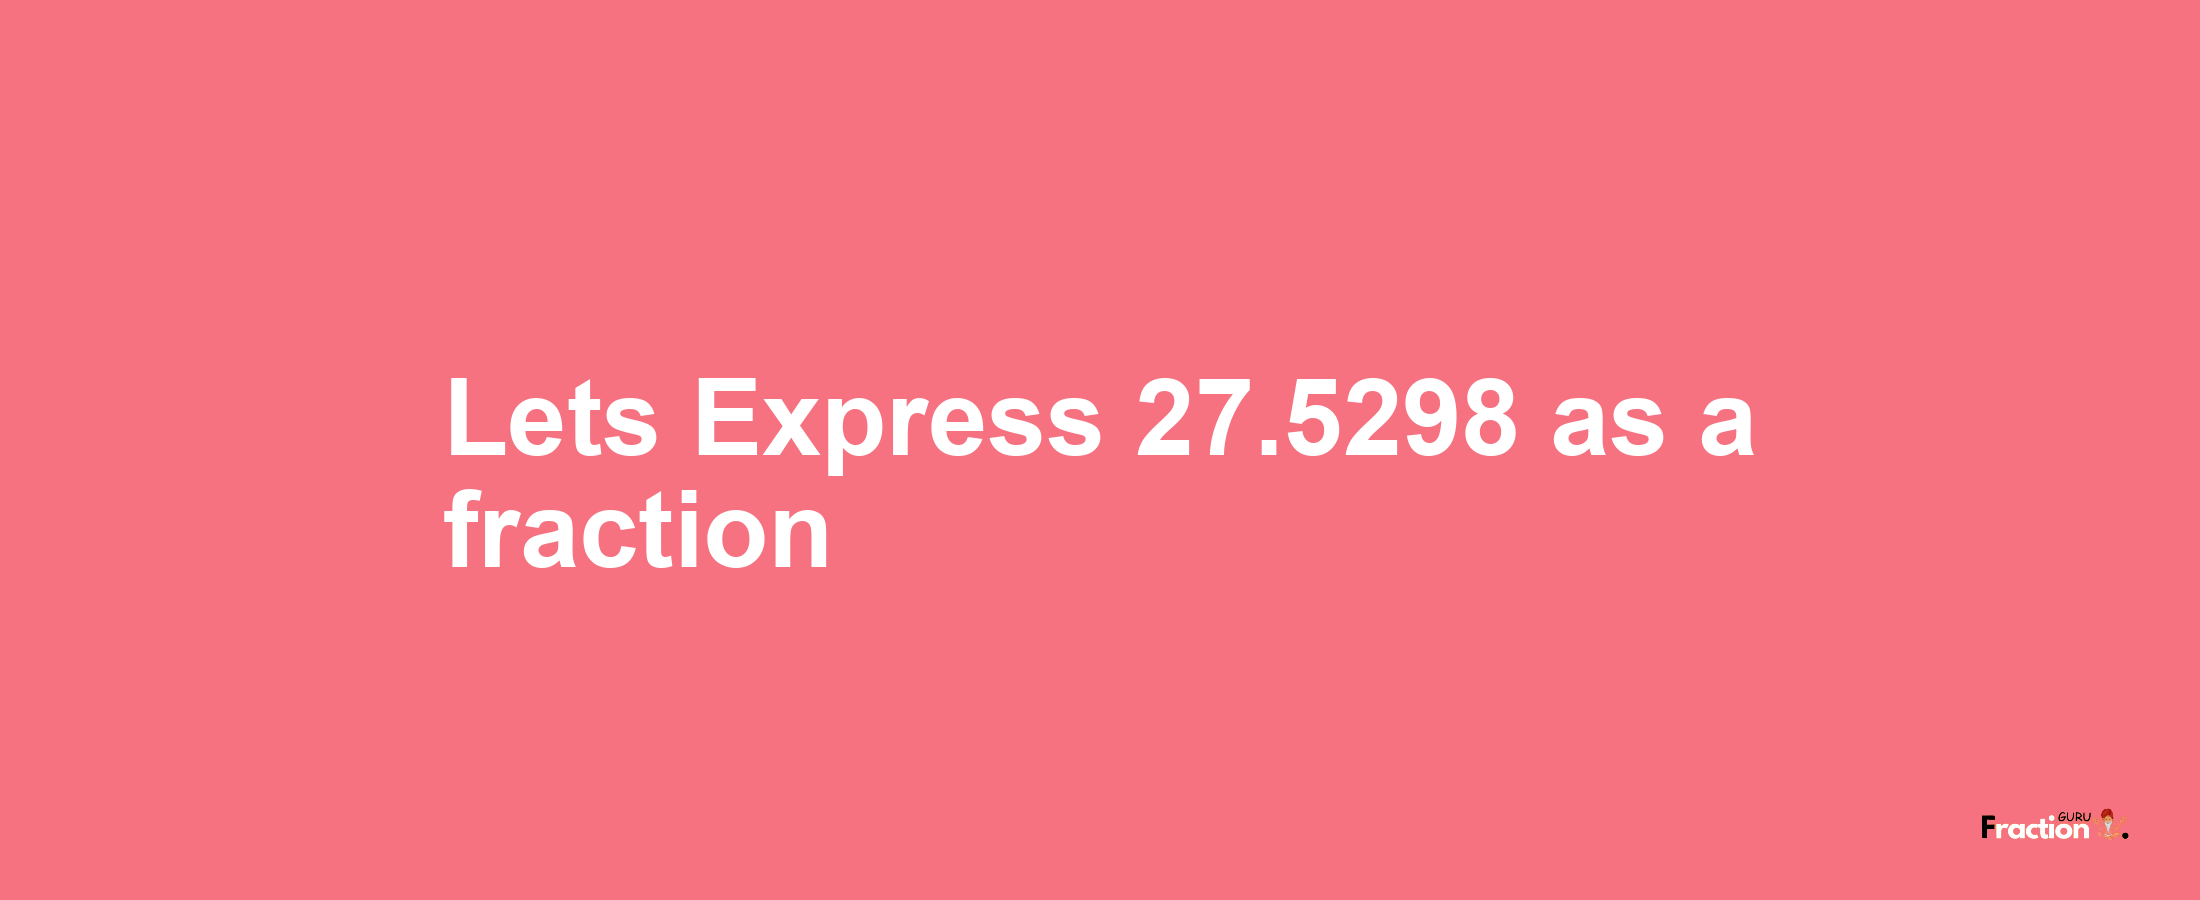 Lets Express 27.5298 as afraction